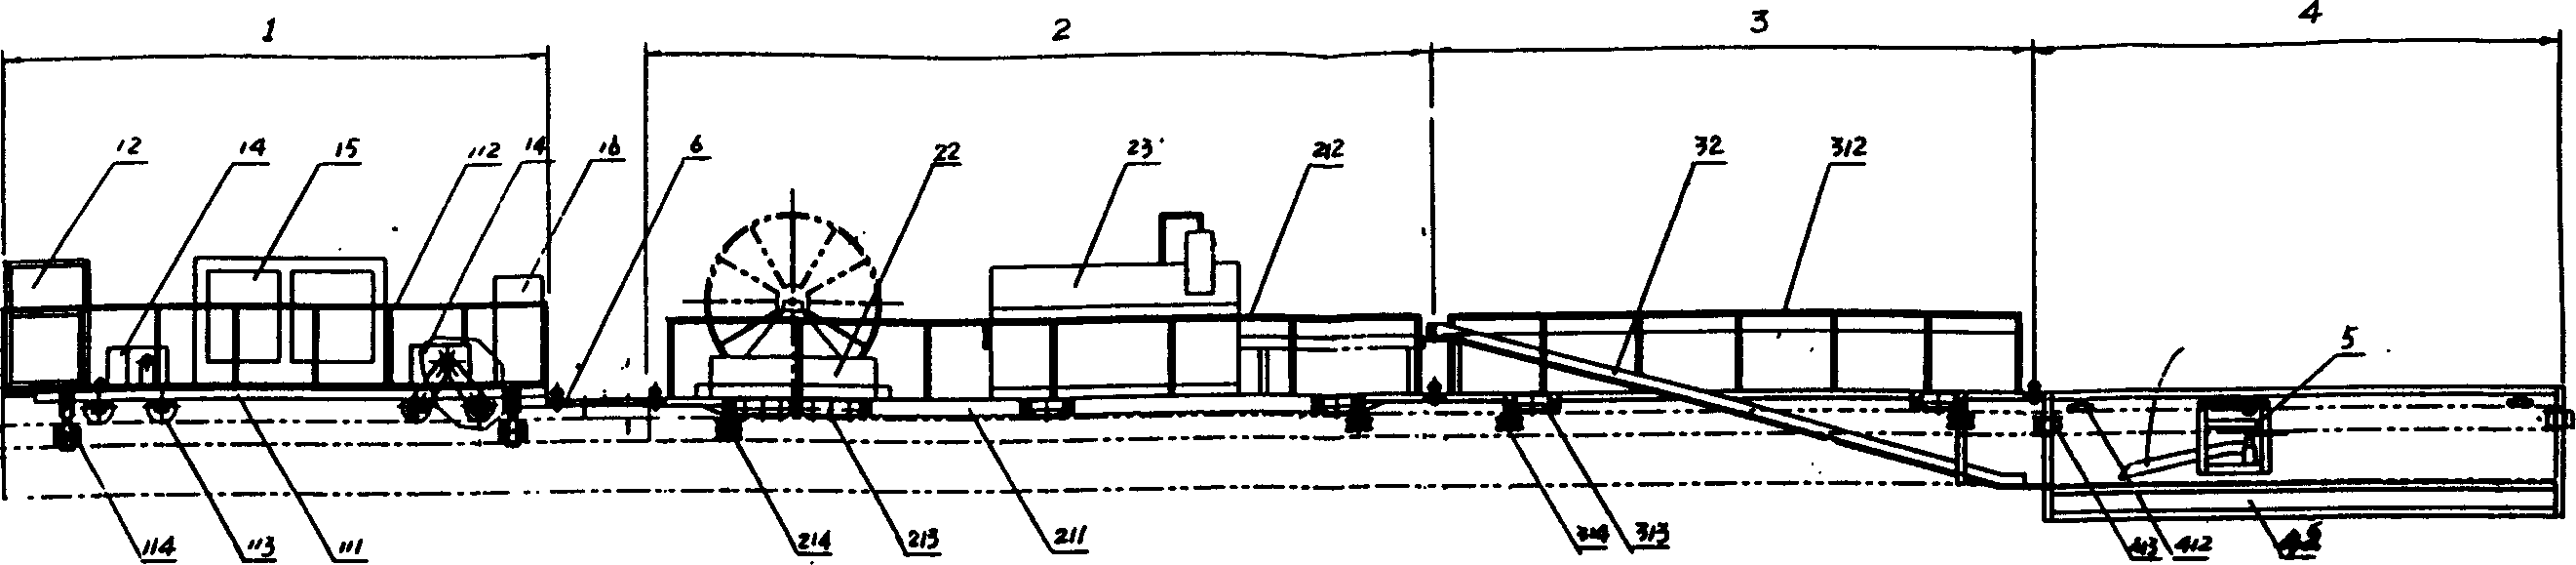 Semi-automatic combination vehicle for laying stator coil of magnetic suspension railroad train